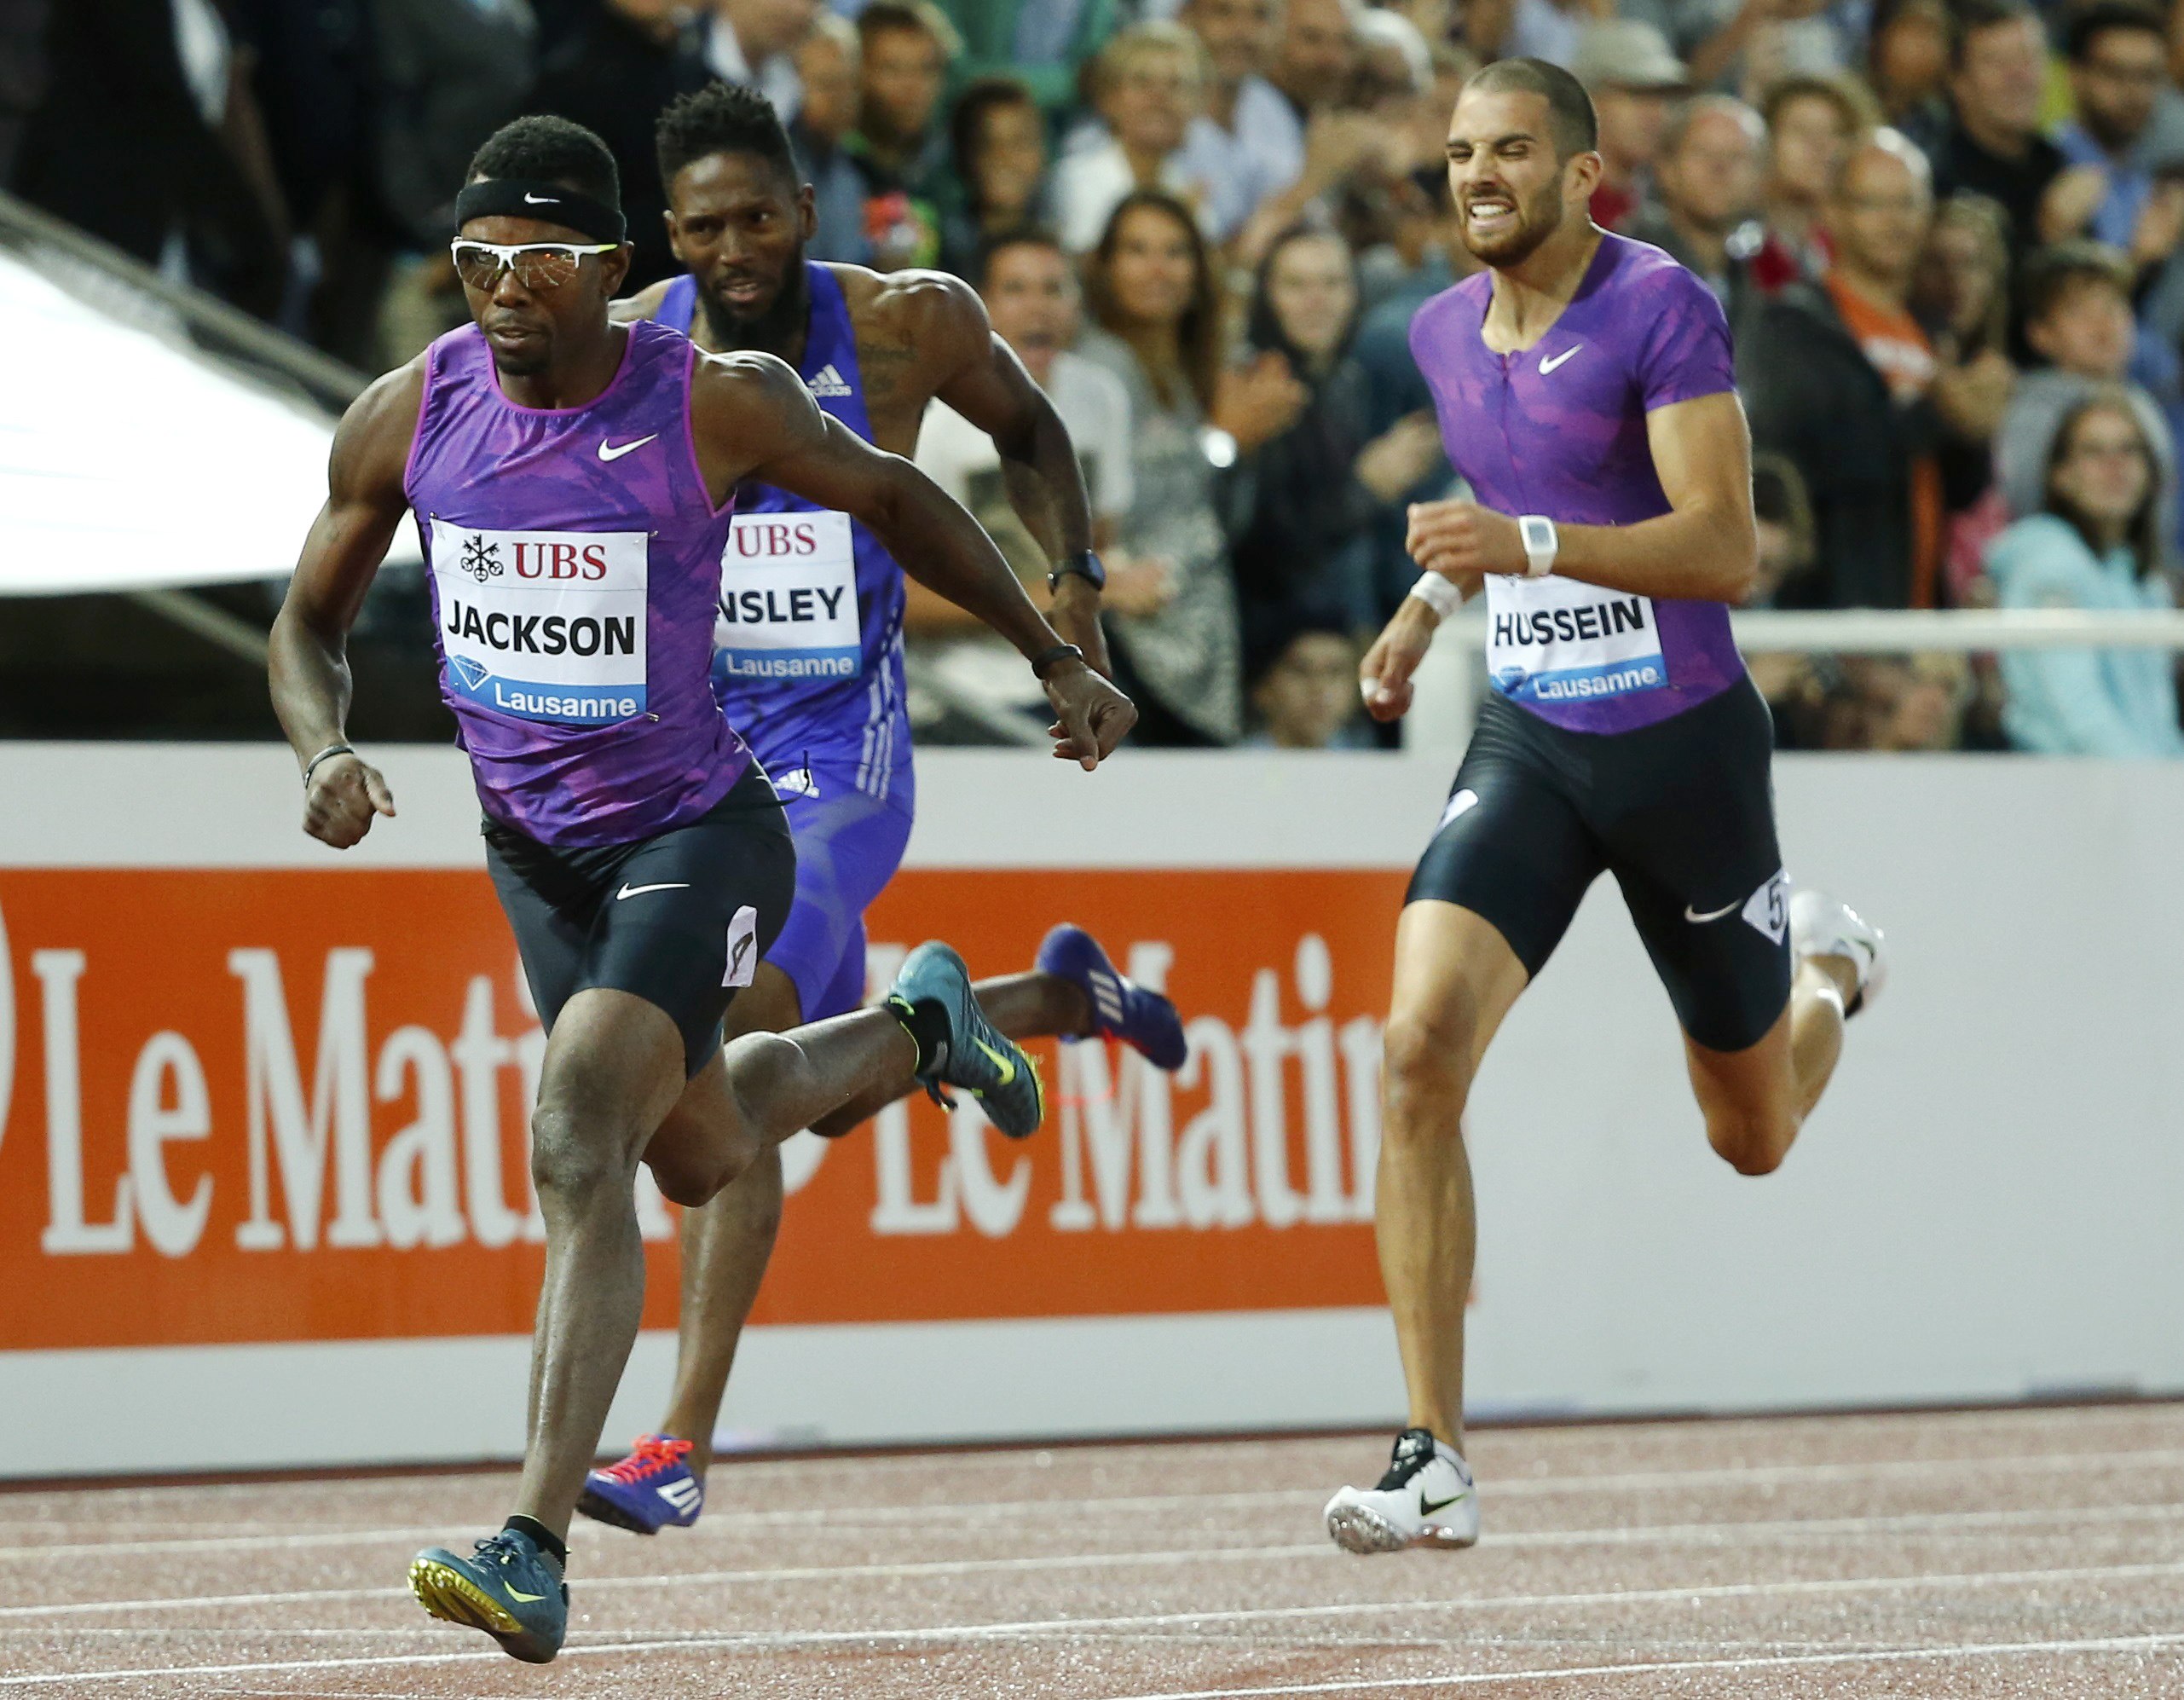 Bershawn Jackson of the U.S., Michael Tinsley of the U.S. and Kariem Hussein of Switzerland (L-R) compete in the 400 metres hurdles men event at the IAAF Diamond League Athletissima athletics meeting at the Pontaise Stadium in Lausanne, Switzerland, July 9, 2015. REUTERS/Pierre Albouy